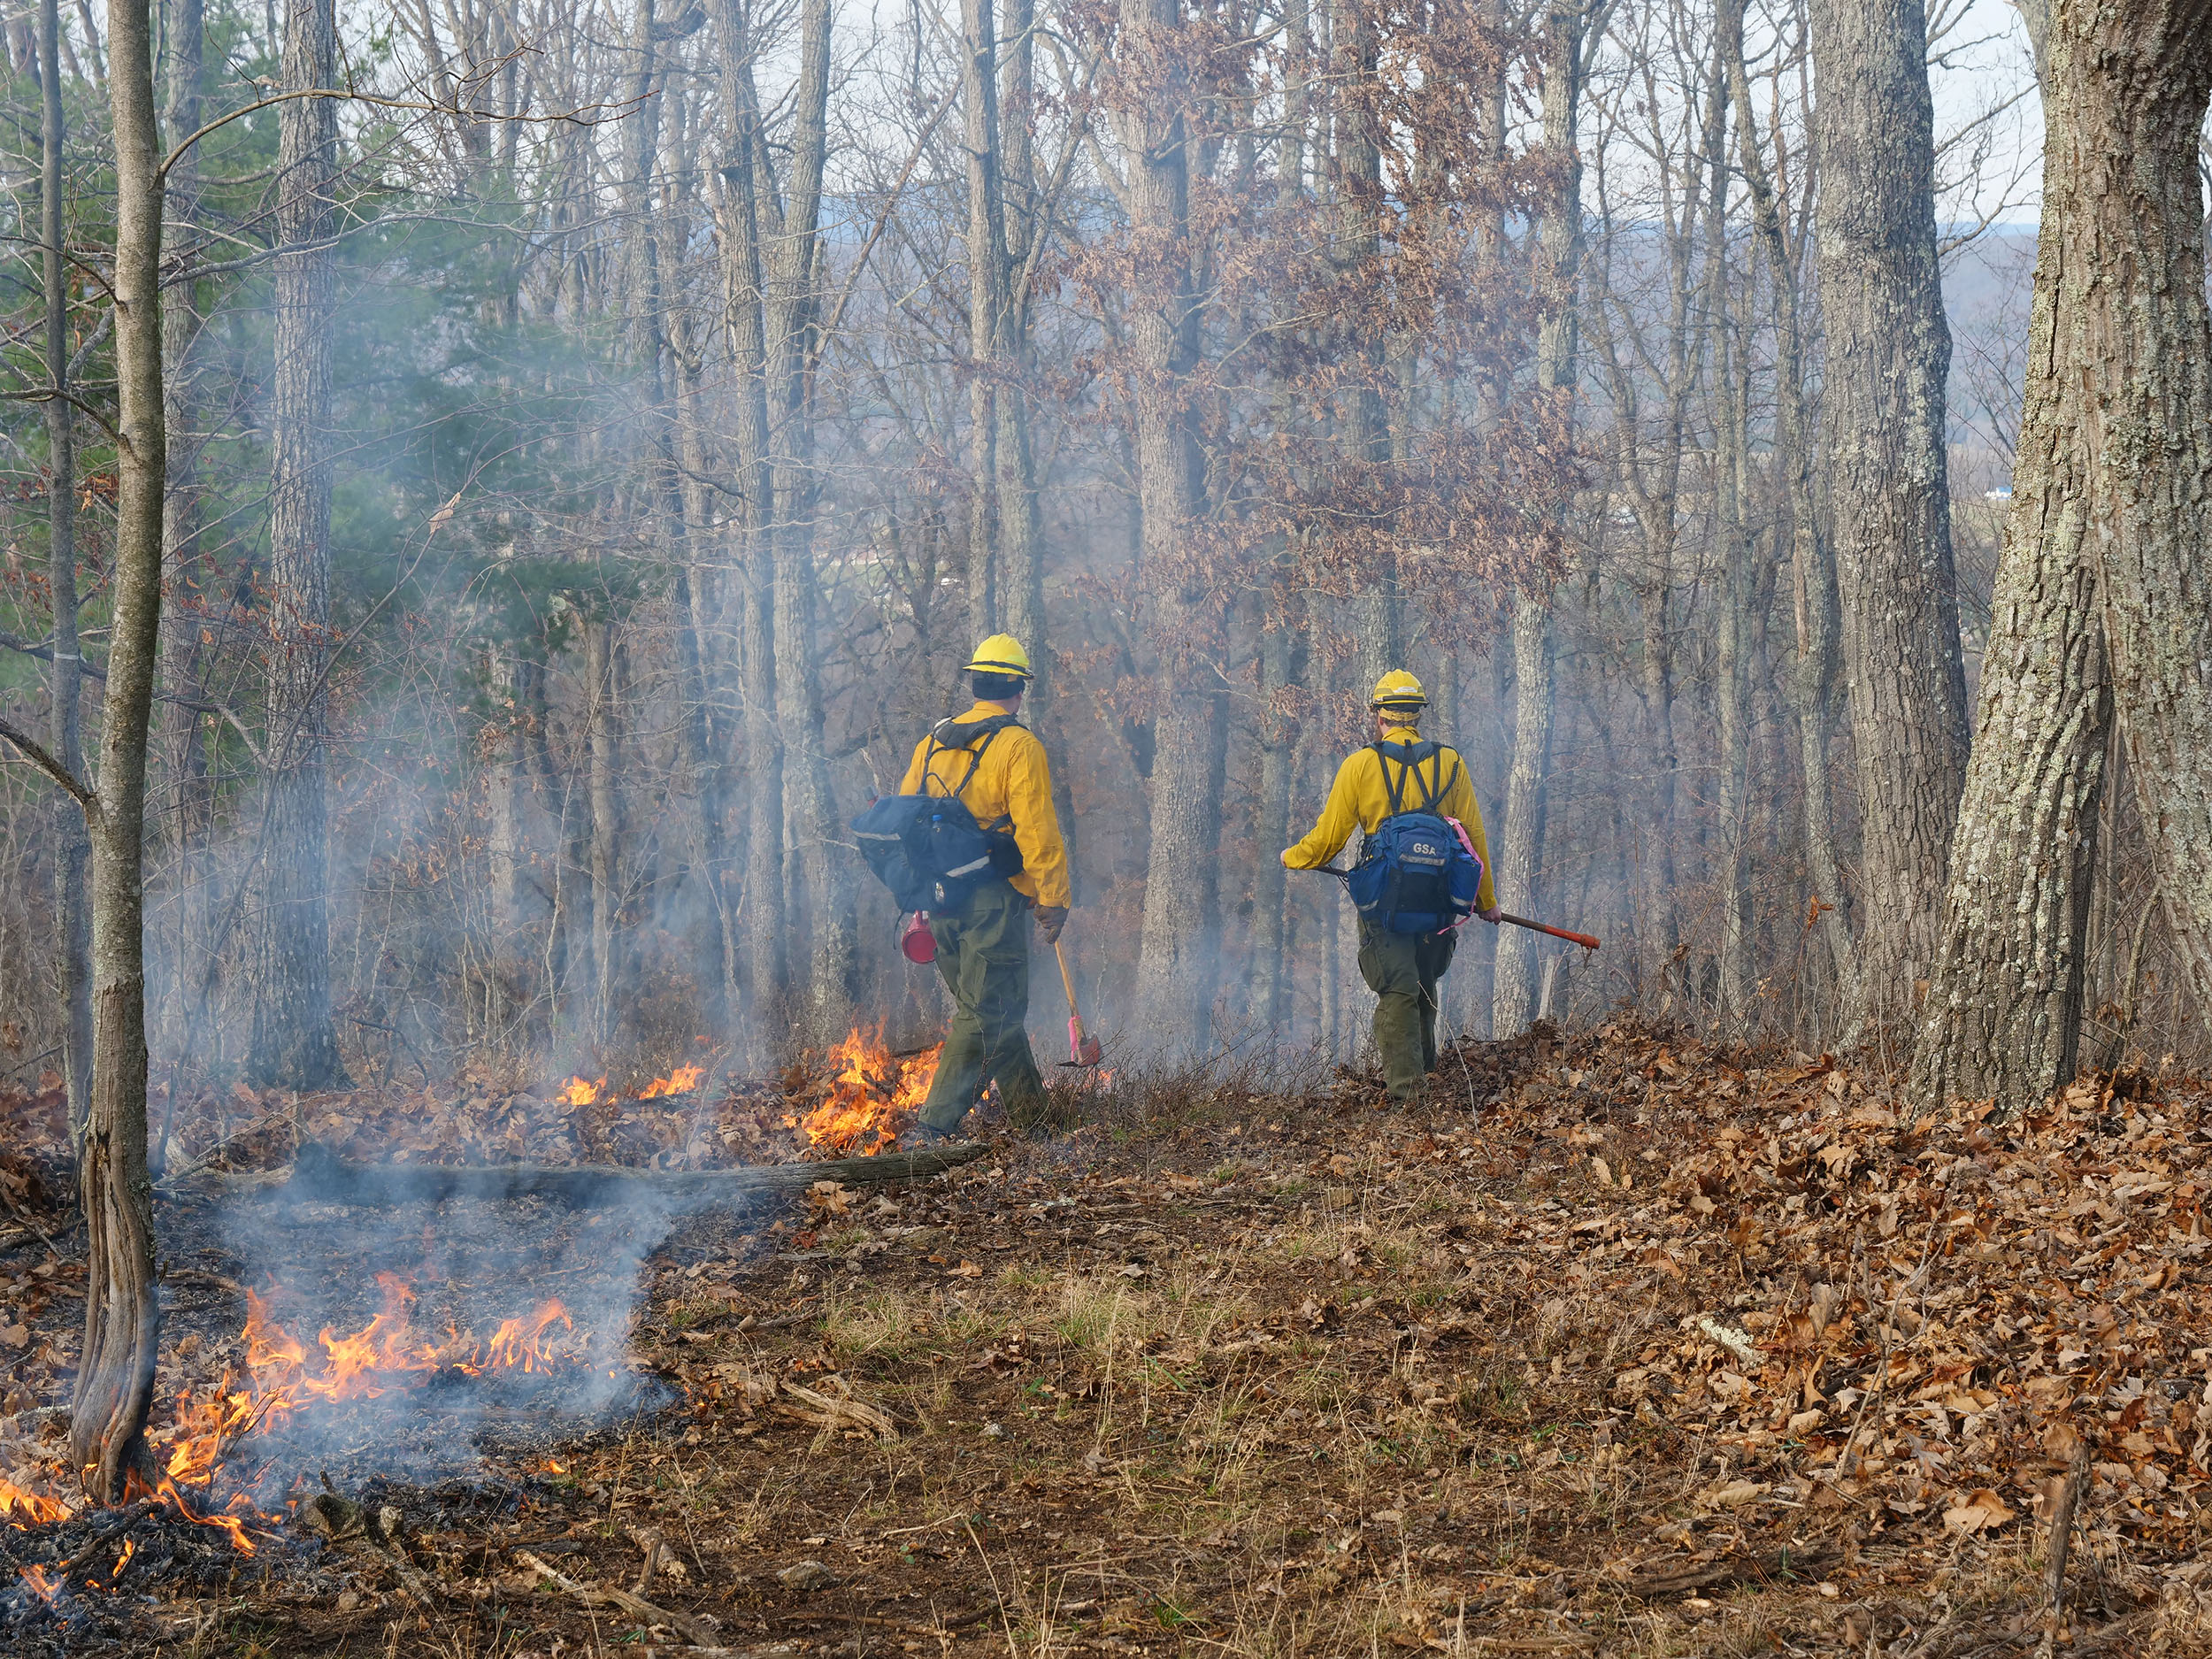 Crew members patrol the fire line with shovels and rakes to ensure that no flames or embers escape the established perimeter